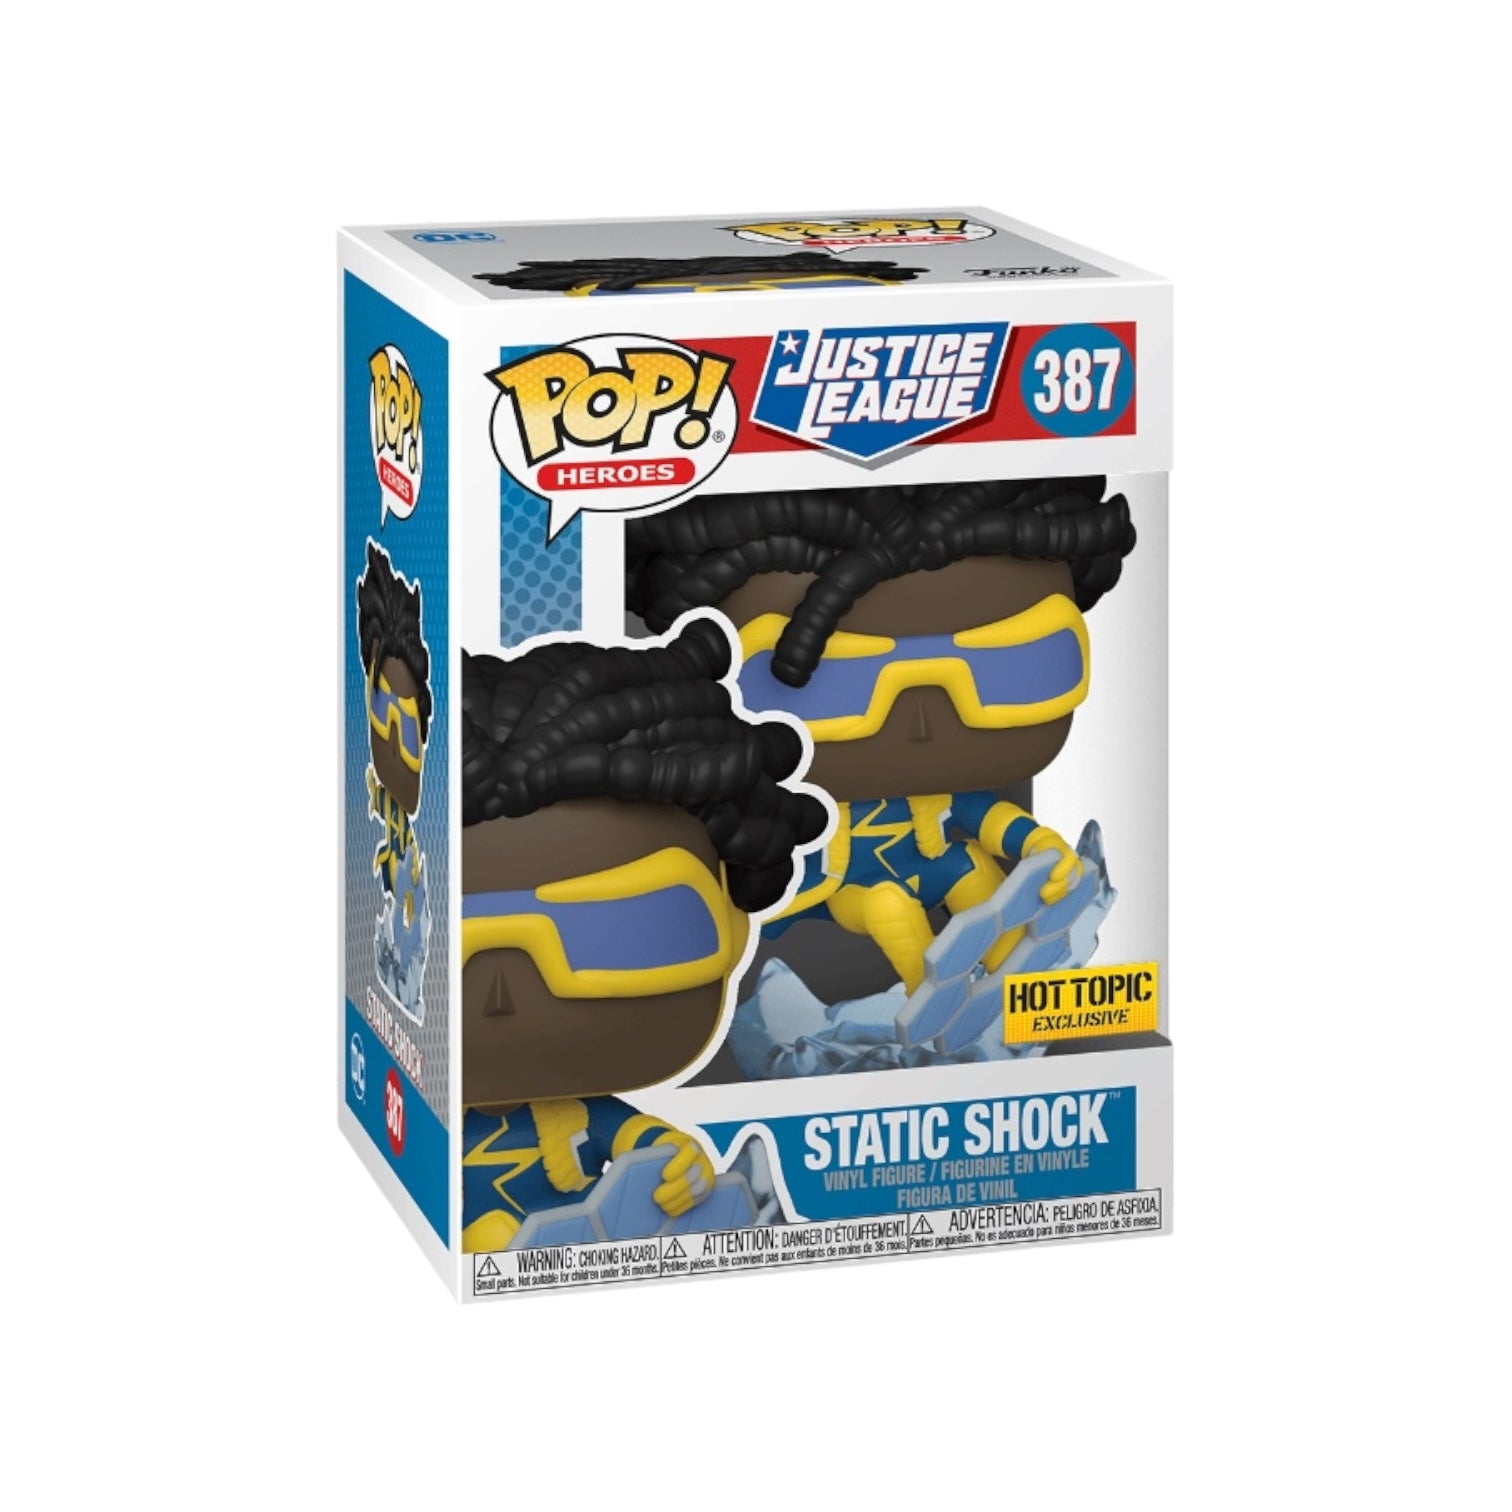 Static Shock #387 Funko Pop! - Justice League - Hot Topic Exclusive